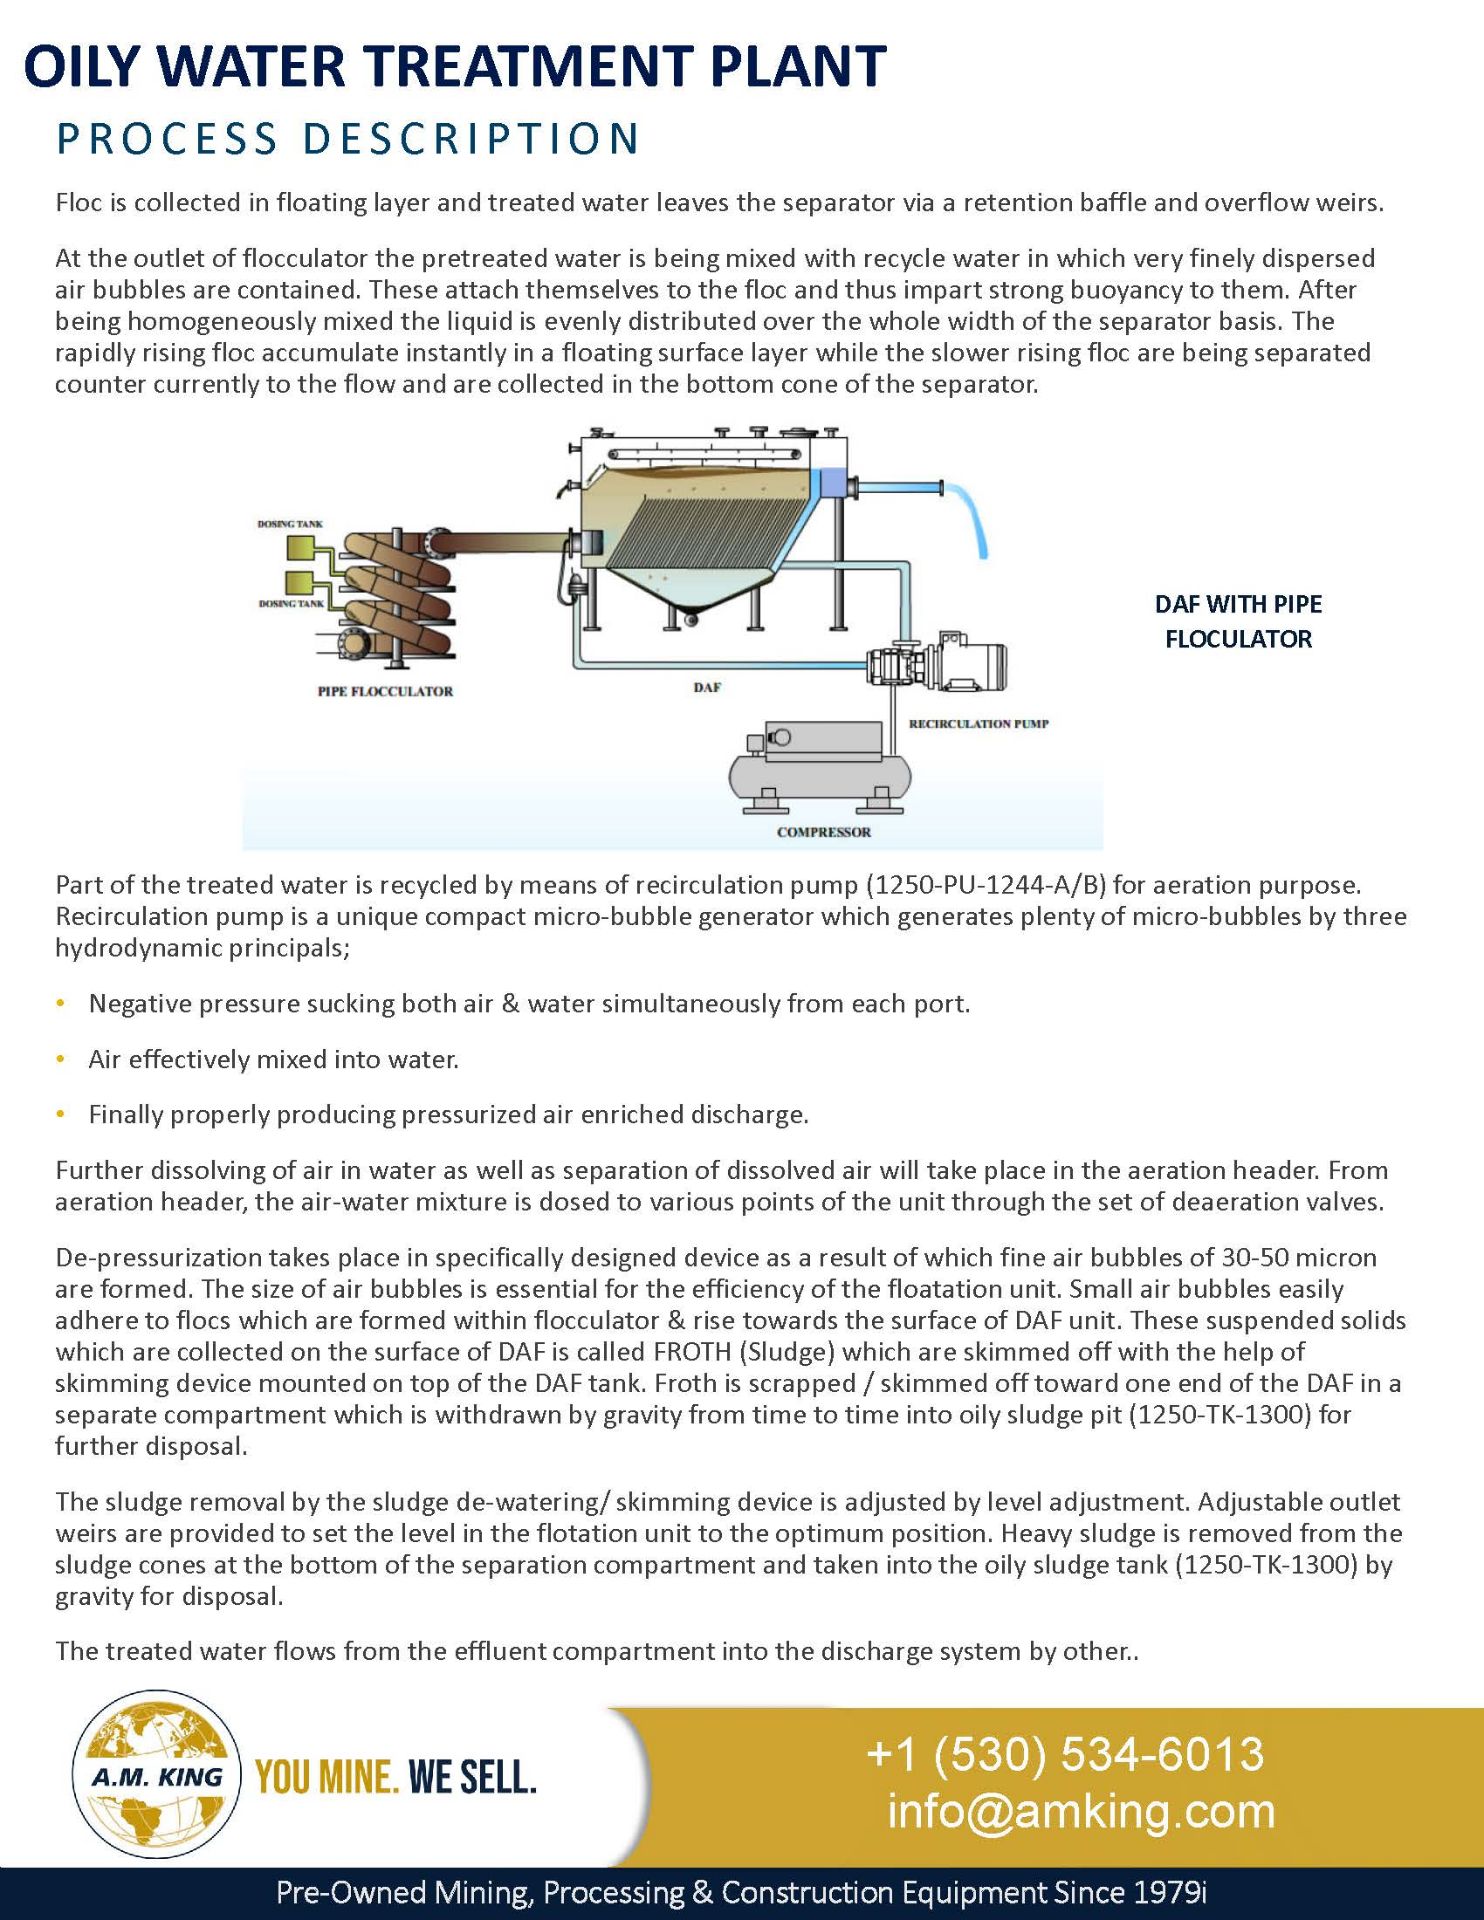 Oily Water Treatment System - Image 5 of 21